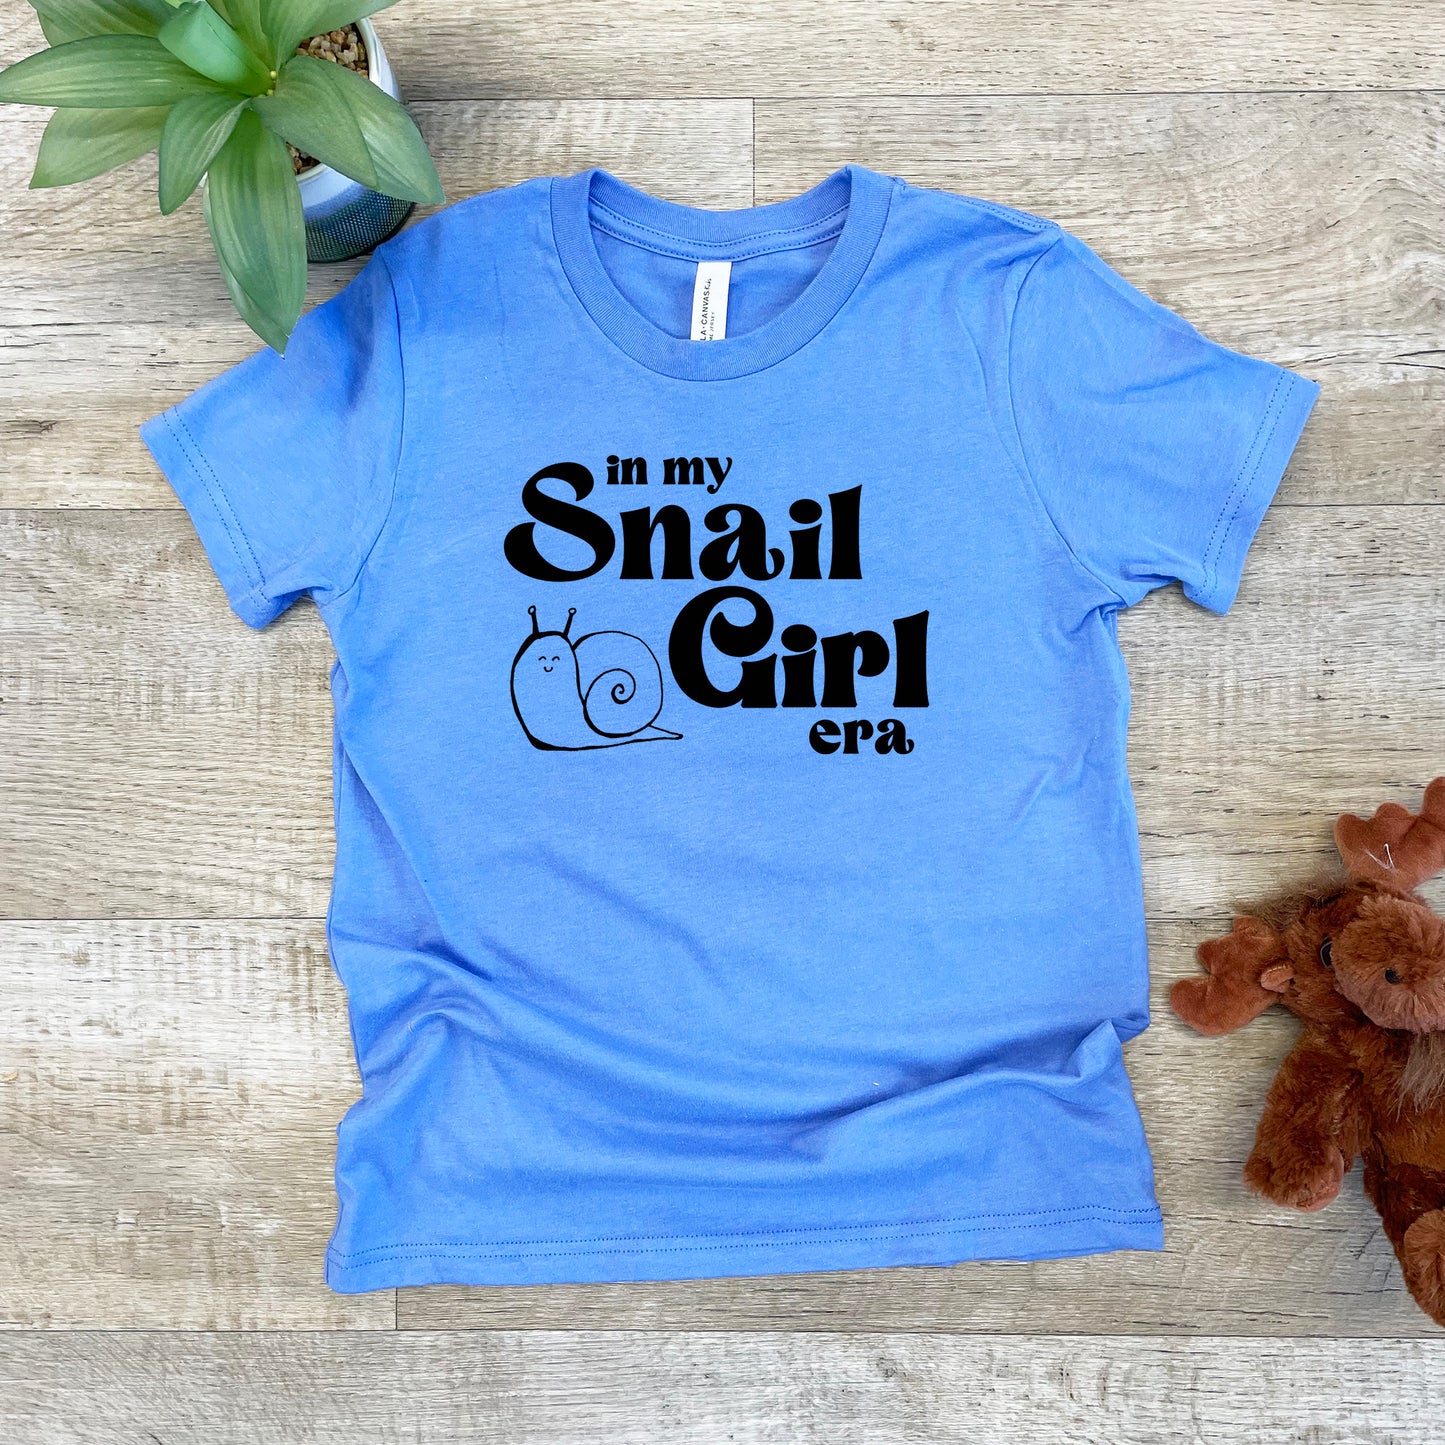 a t - shirt that says in my small girl era next to a teddy bear